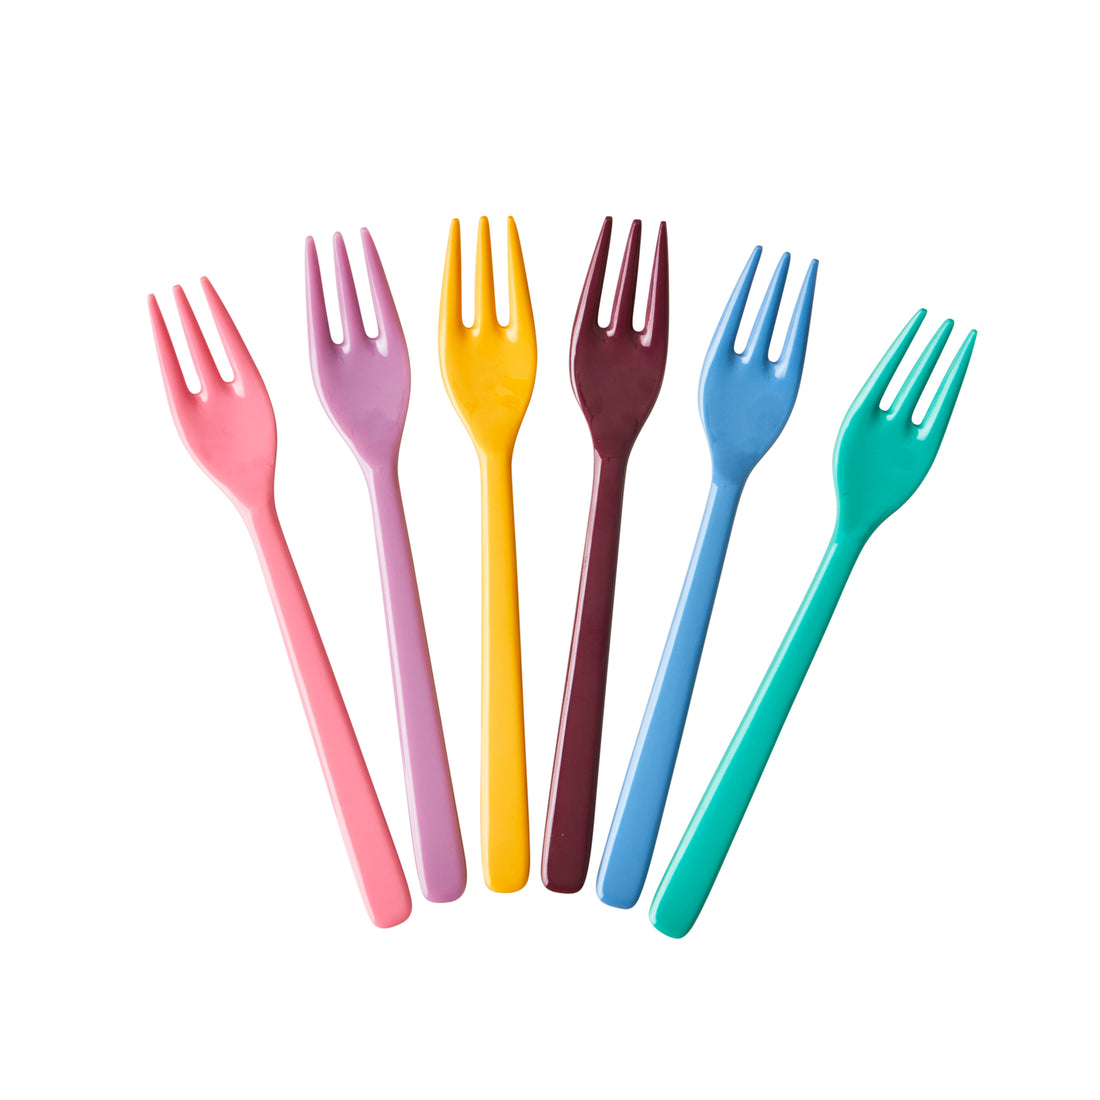 rice-dk-melamine-cake-forks-in-assorted-dance-out-colors-bundle-of-6-assorted-rice-mesfo-6zaw22-